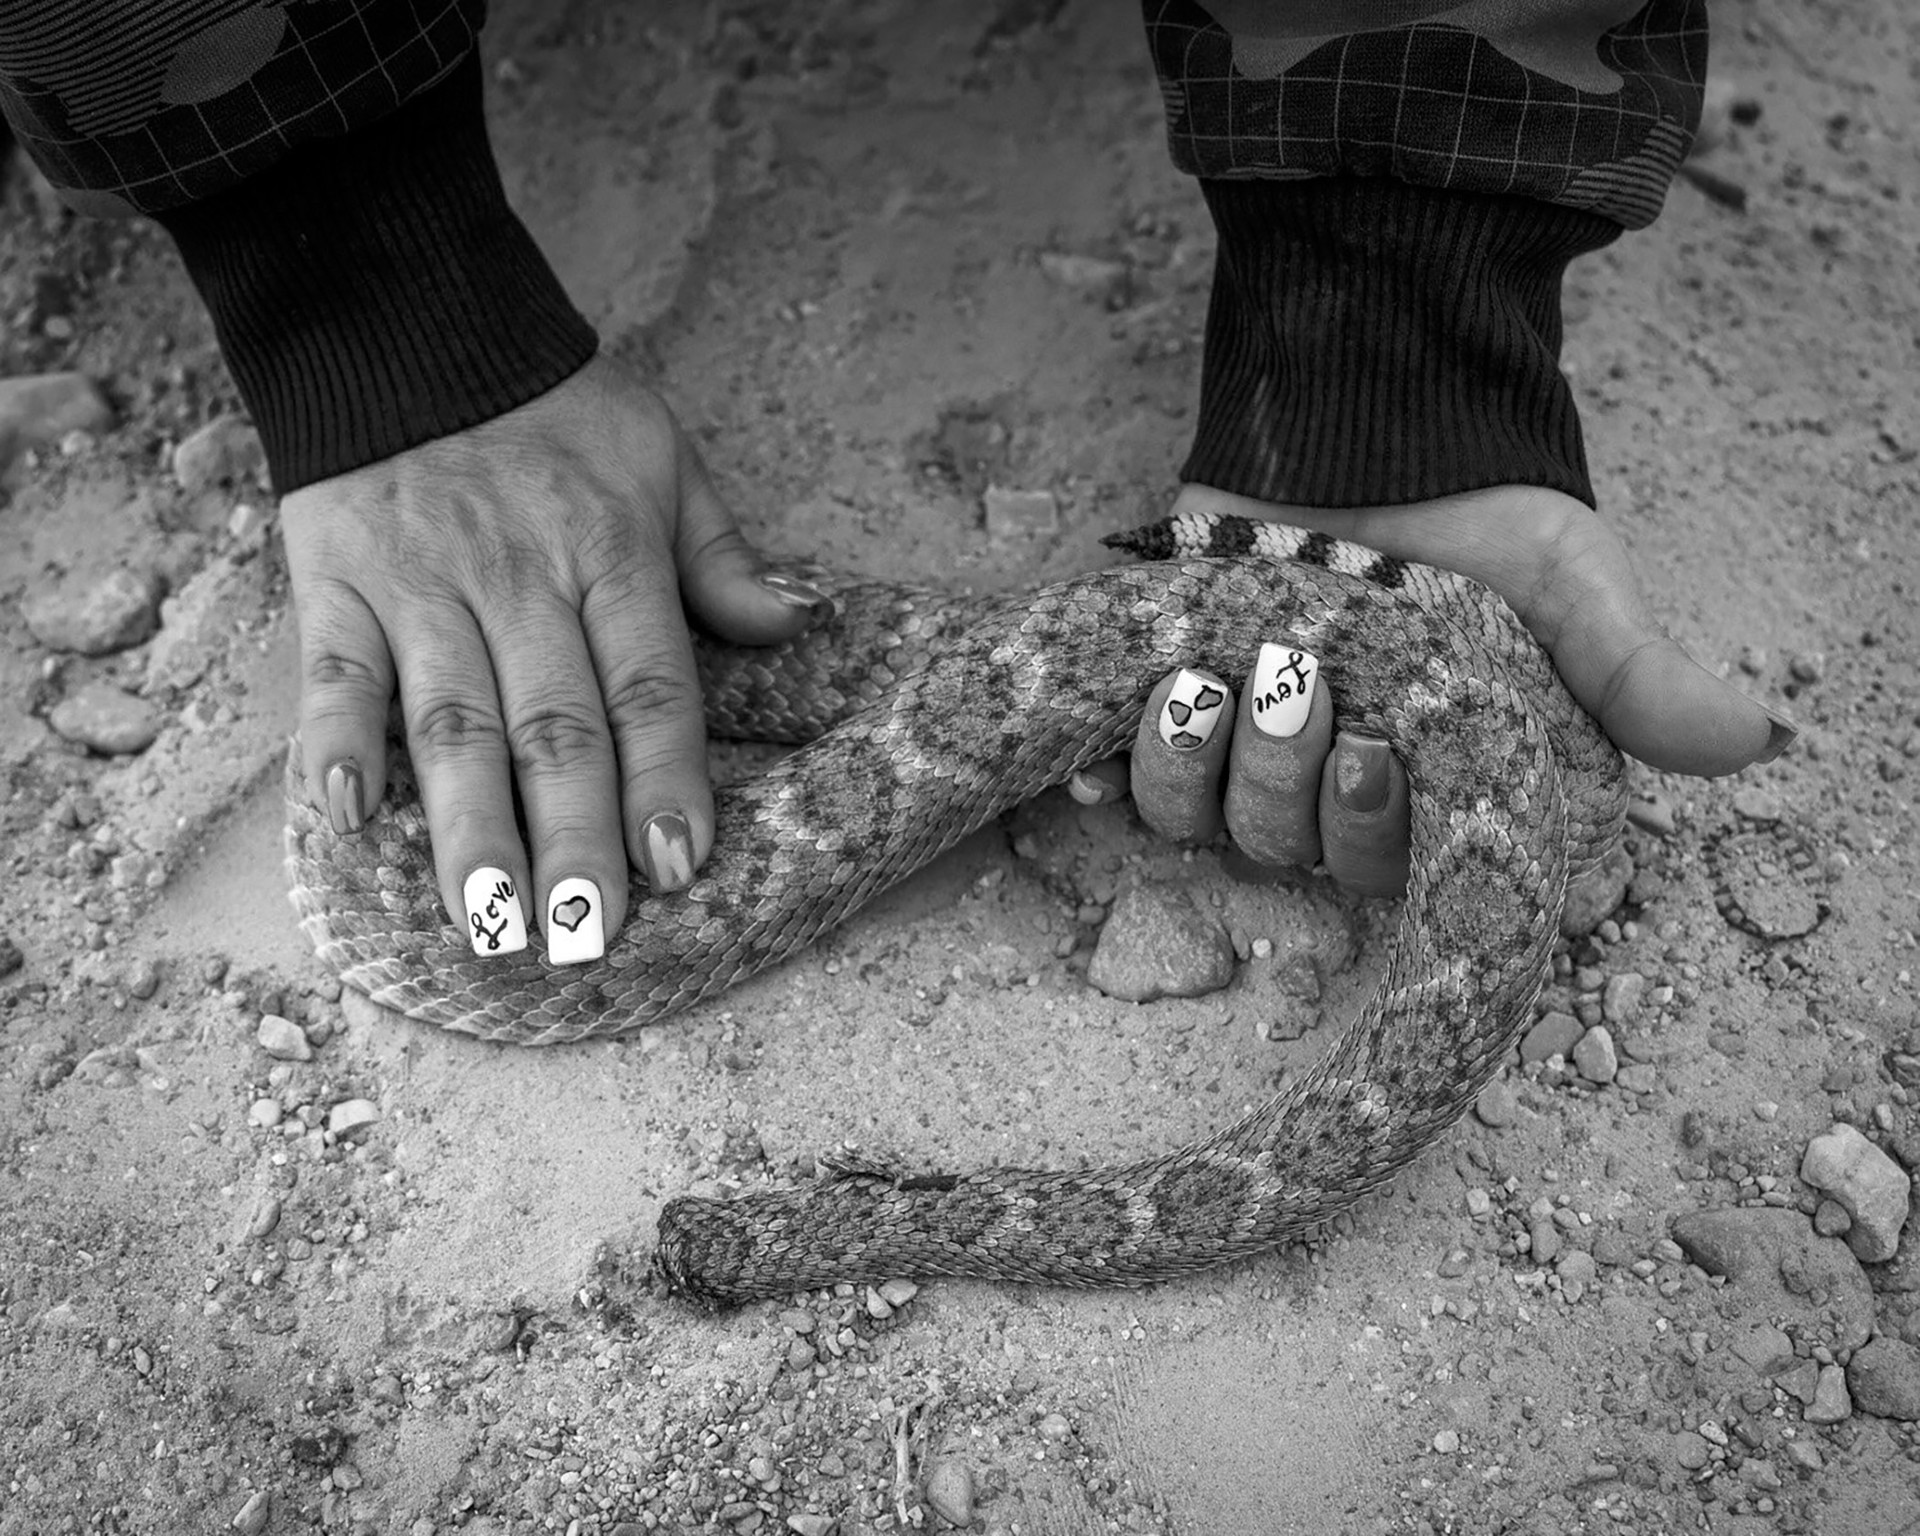 Rattlesnake Love by Kevin Greenblat